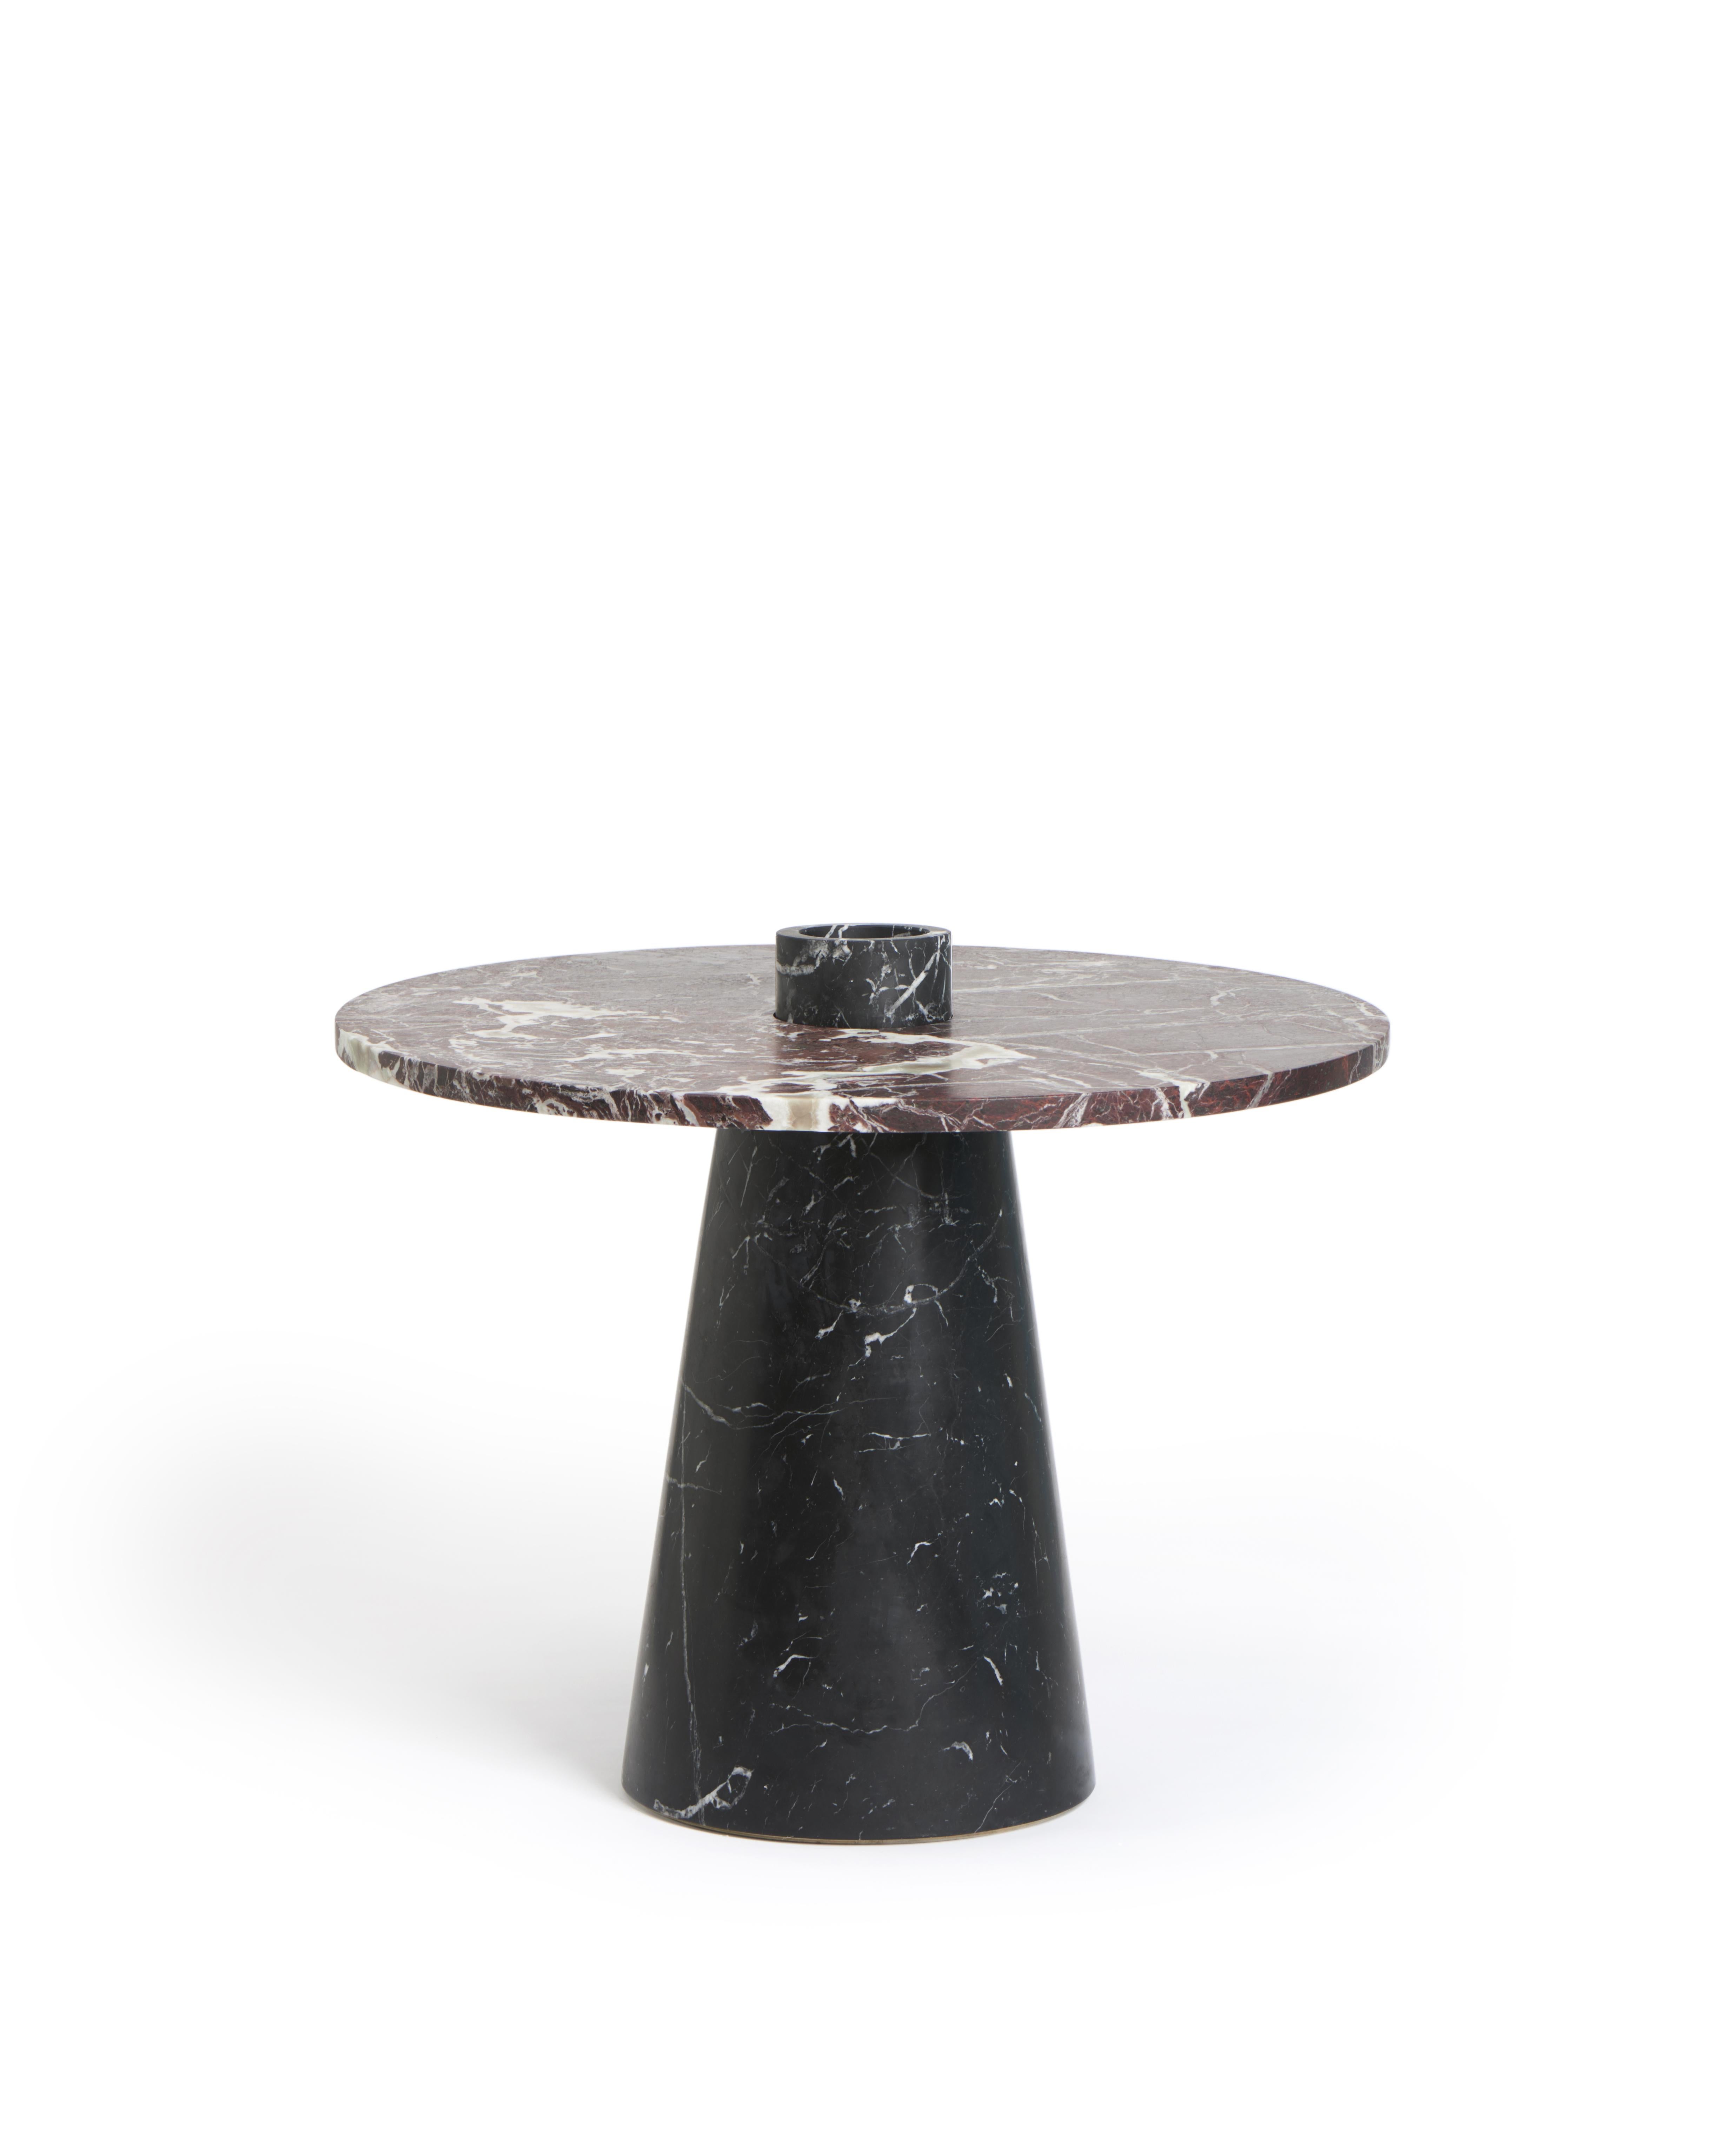 Black inside out coffee table set by Karen Chekerdjian
Dimensions: 58 x 32 x 70 cm
Materials: Rosso Levanto, Nero Marquinia
Includes: Coffee table with fruit bowl, candle holder, flower vase in red marble

Karen’s trajectory into designing was